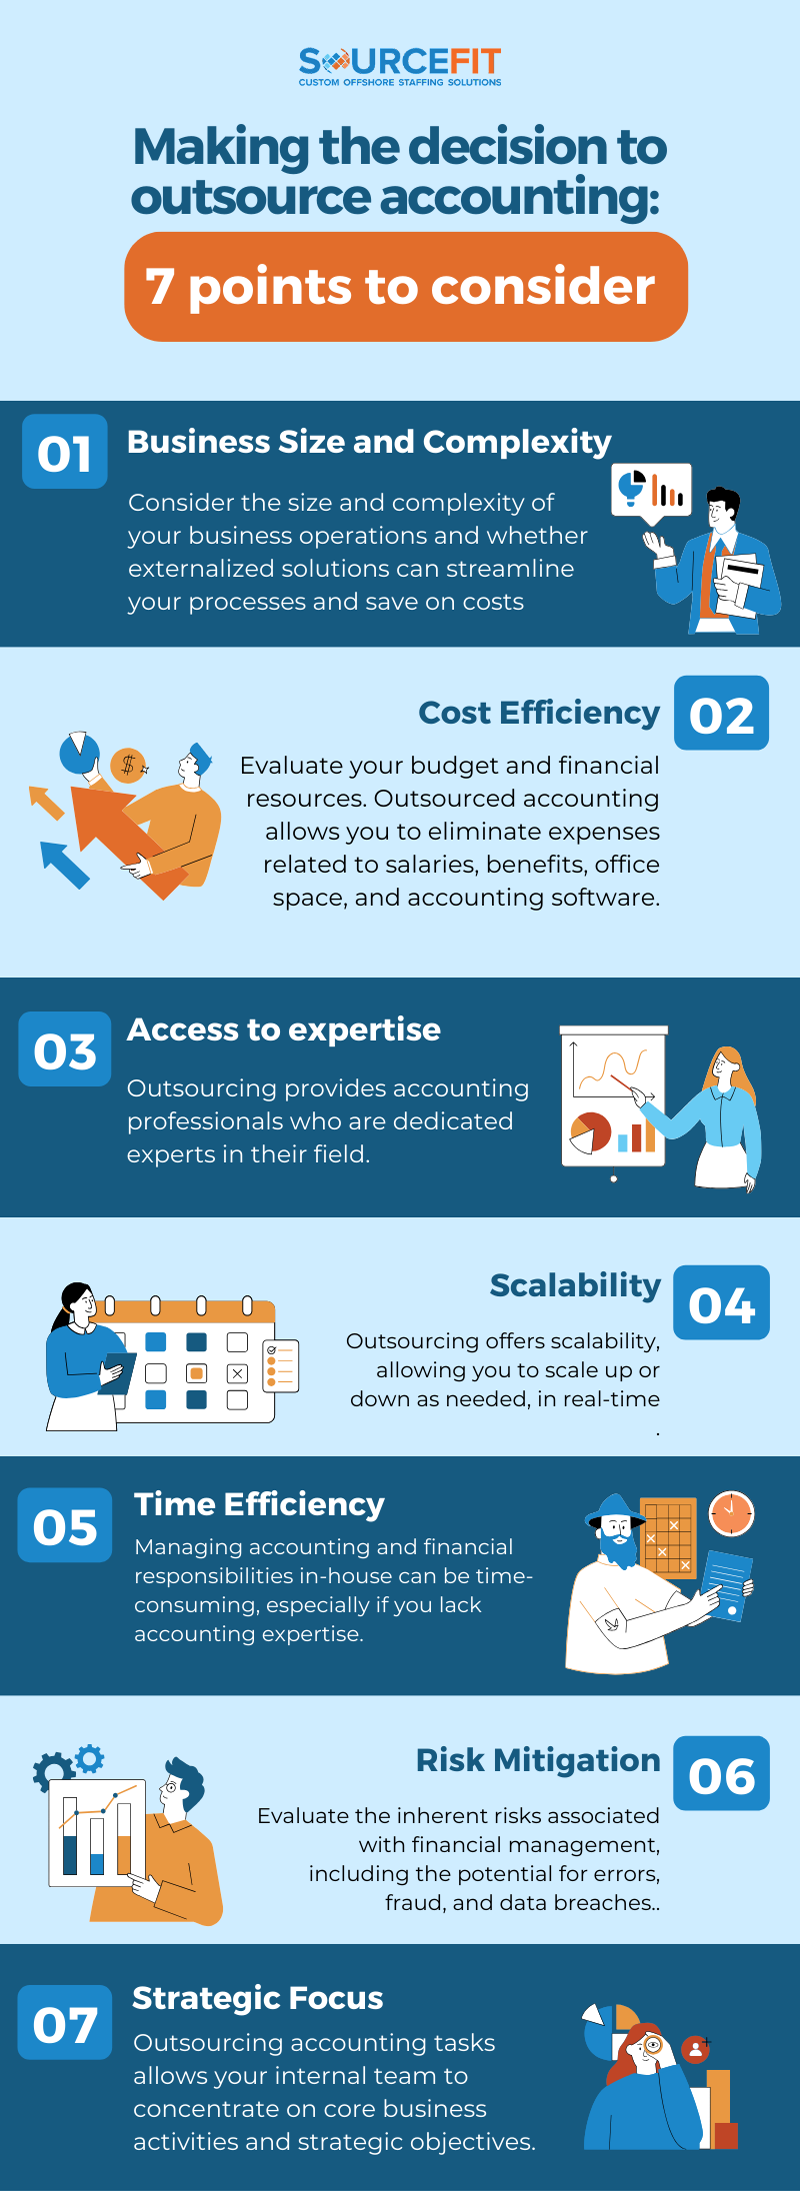 Global - Content - Cluster Article, Accounting - Making the decision, outsourced accounting services Infographics